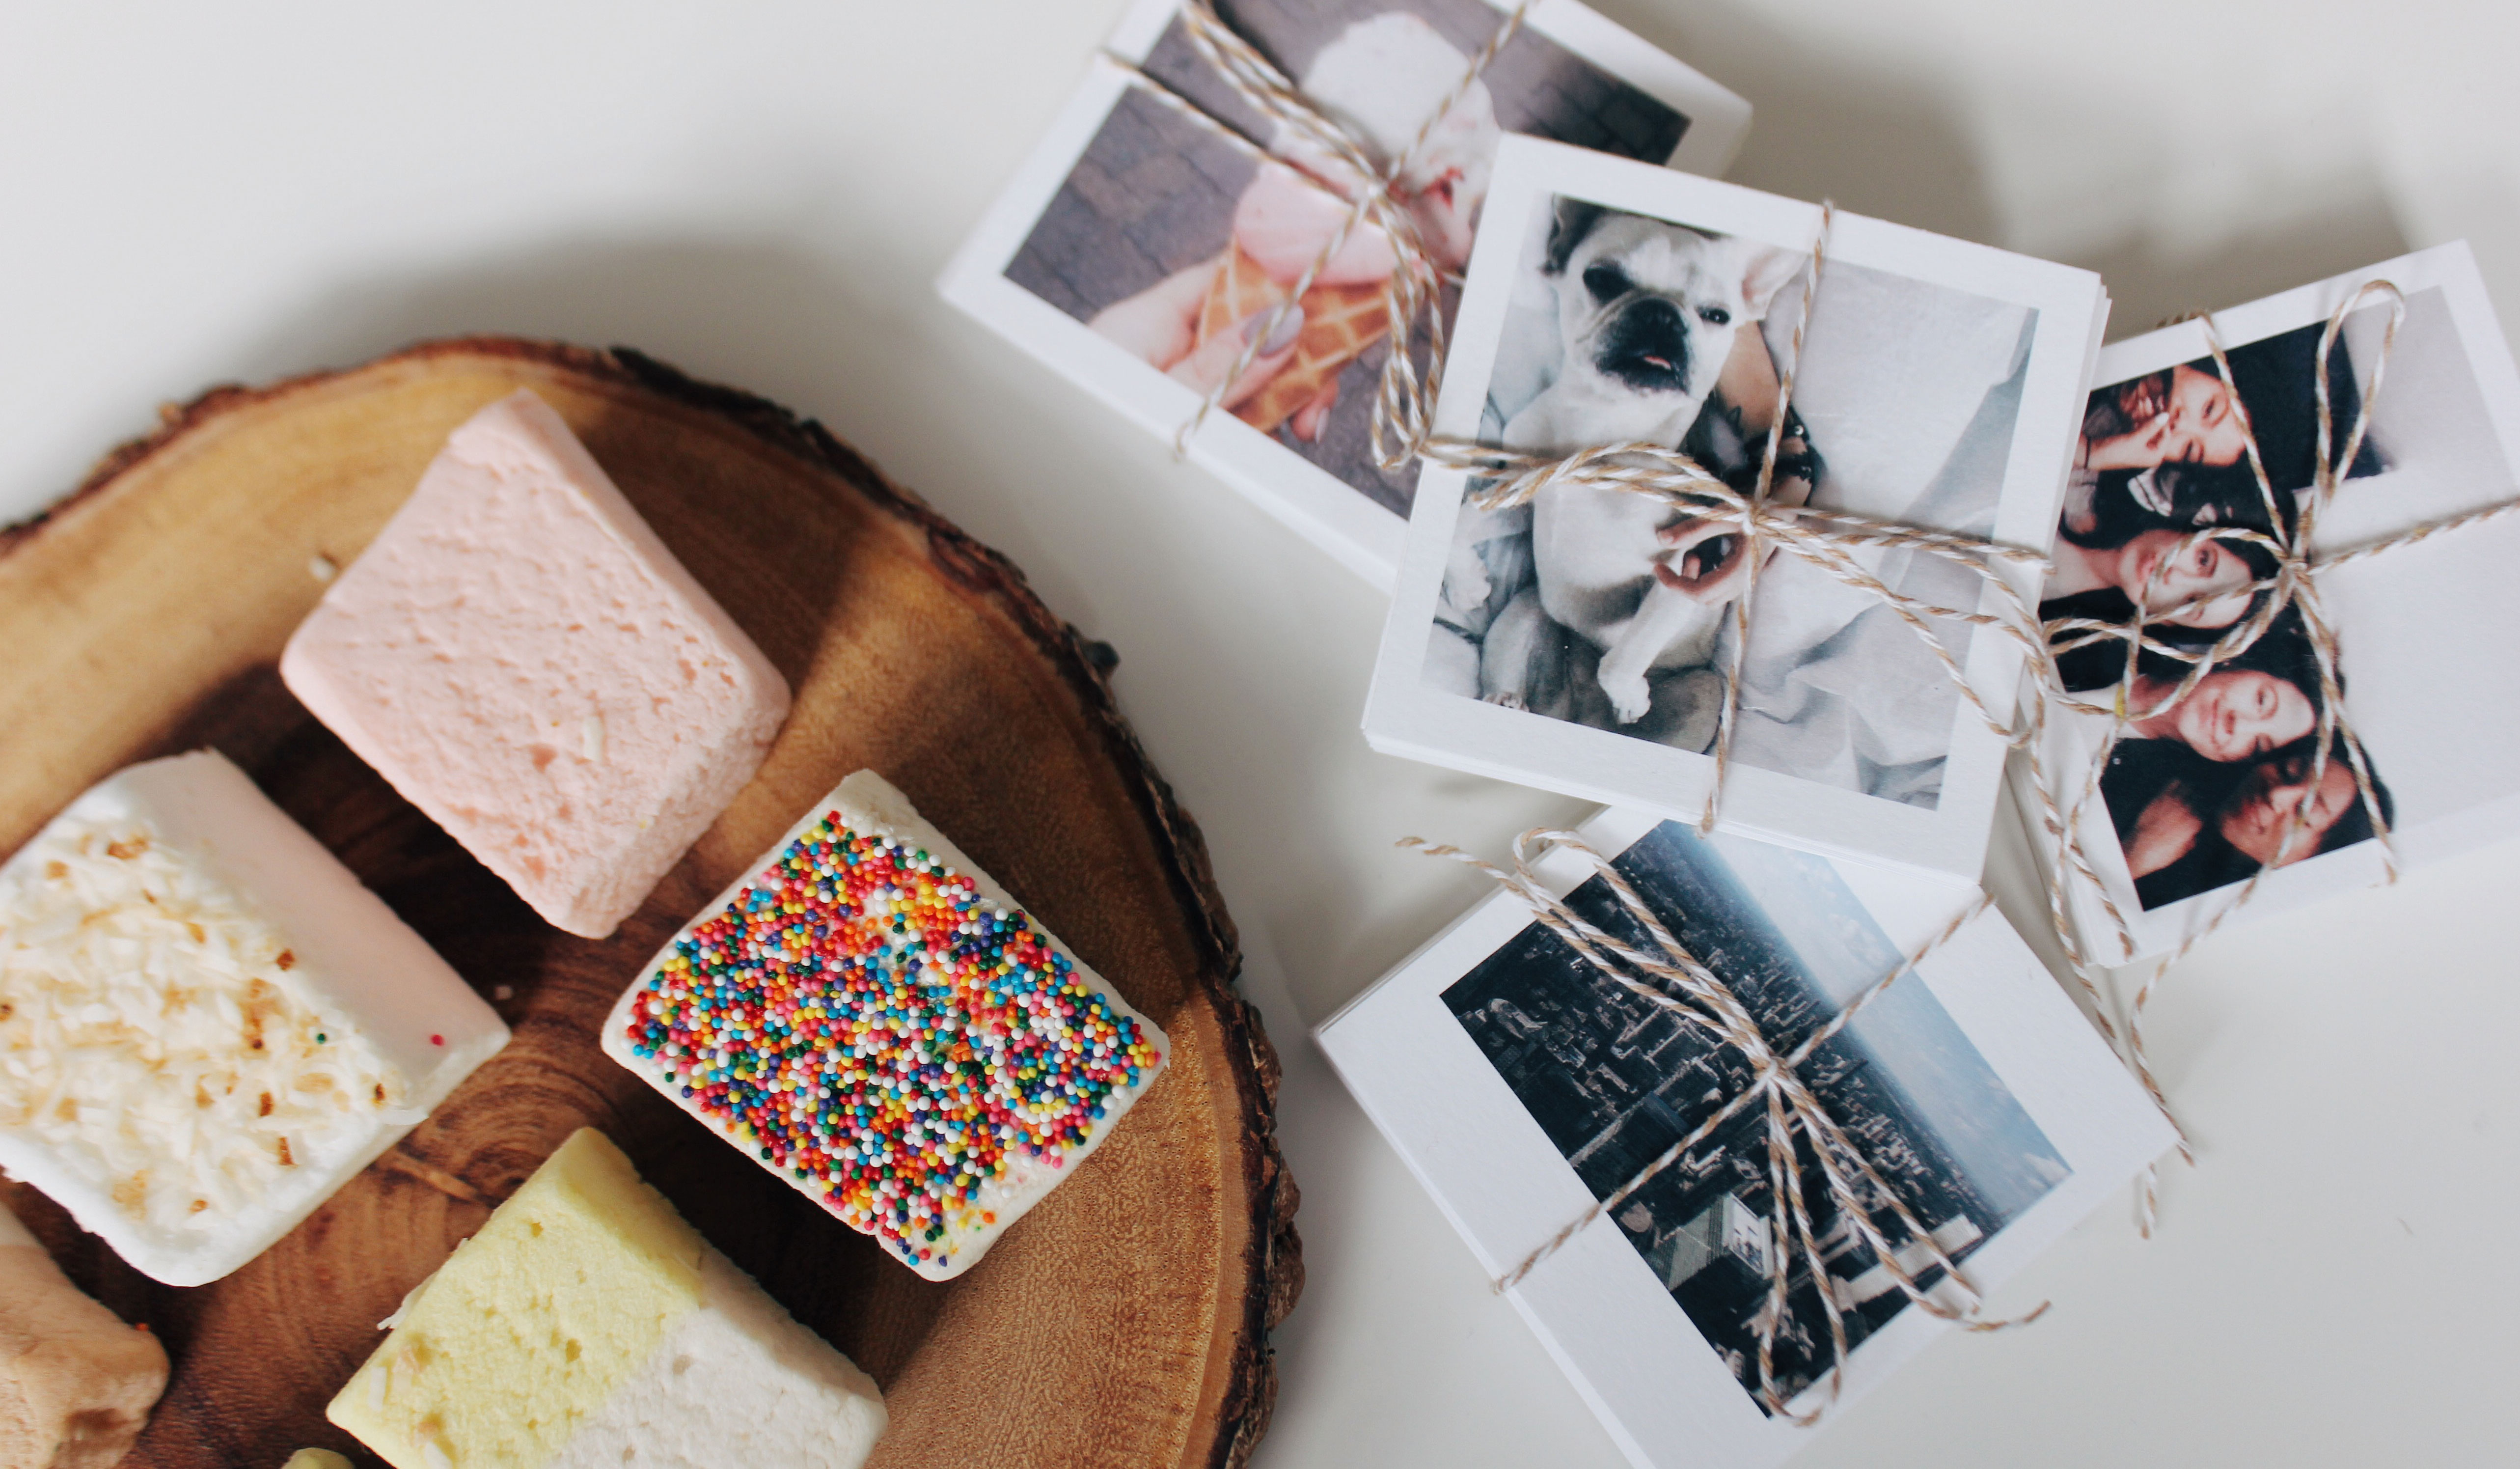 Impressed app | get your friends together and host a photo trading party